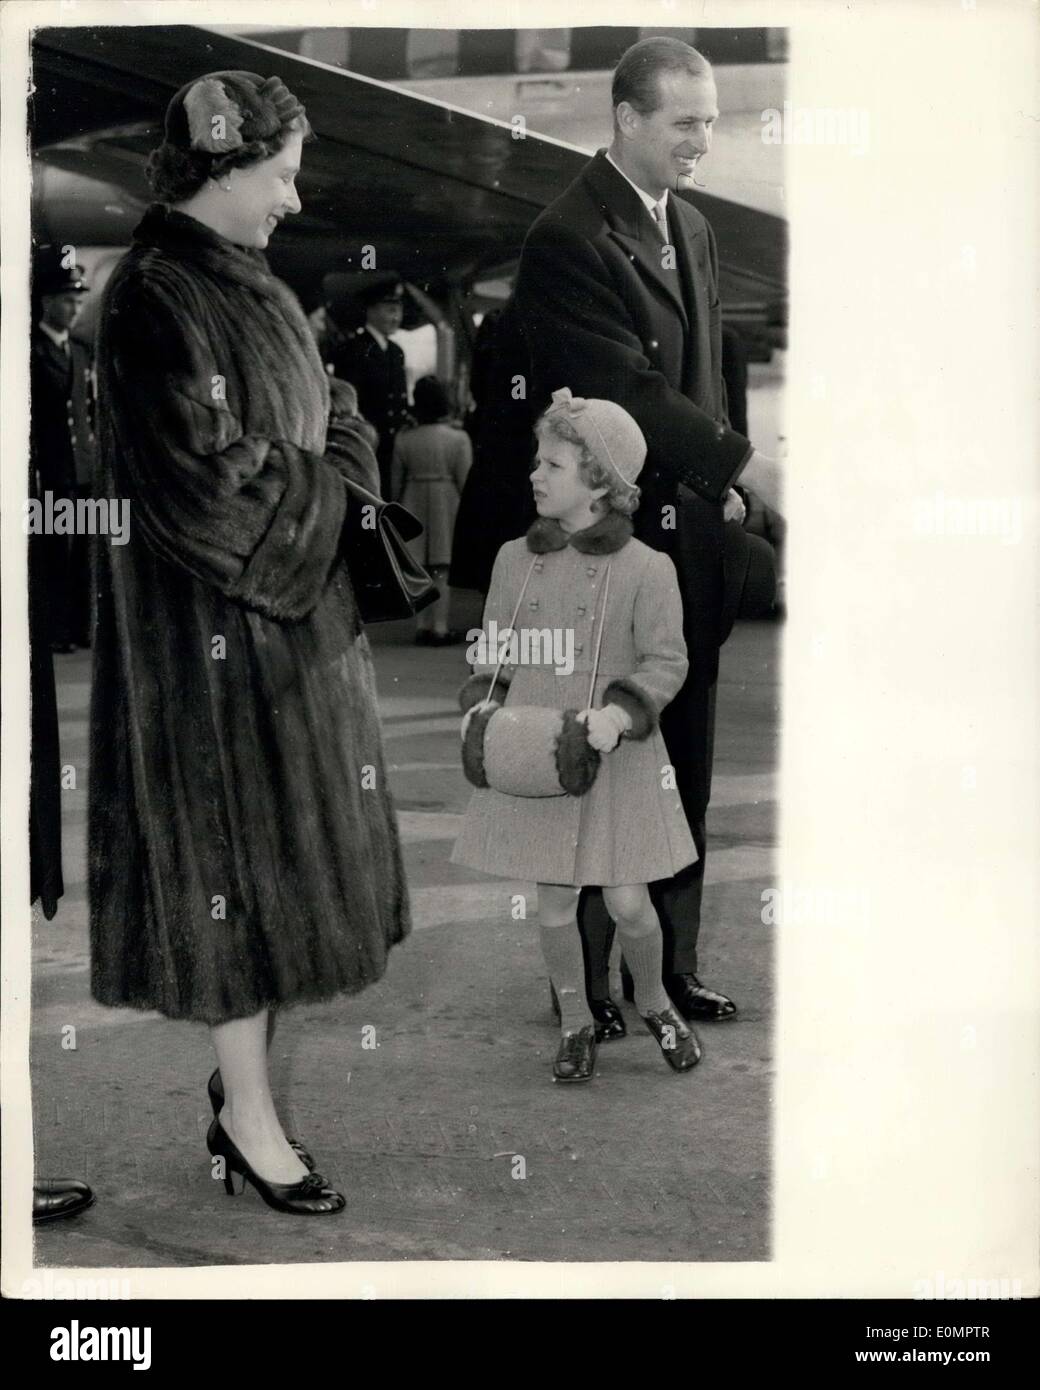 feb-17-1956-the-queen-returns-from-nigeriaa-word-for-princess-anne-E0MPTR.jpg